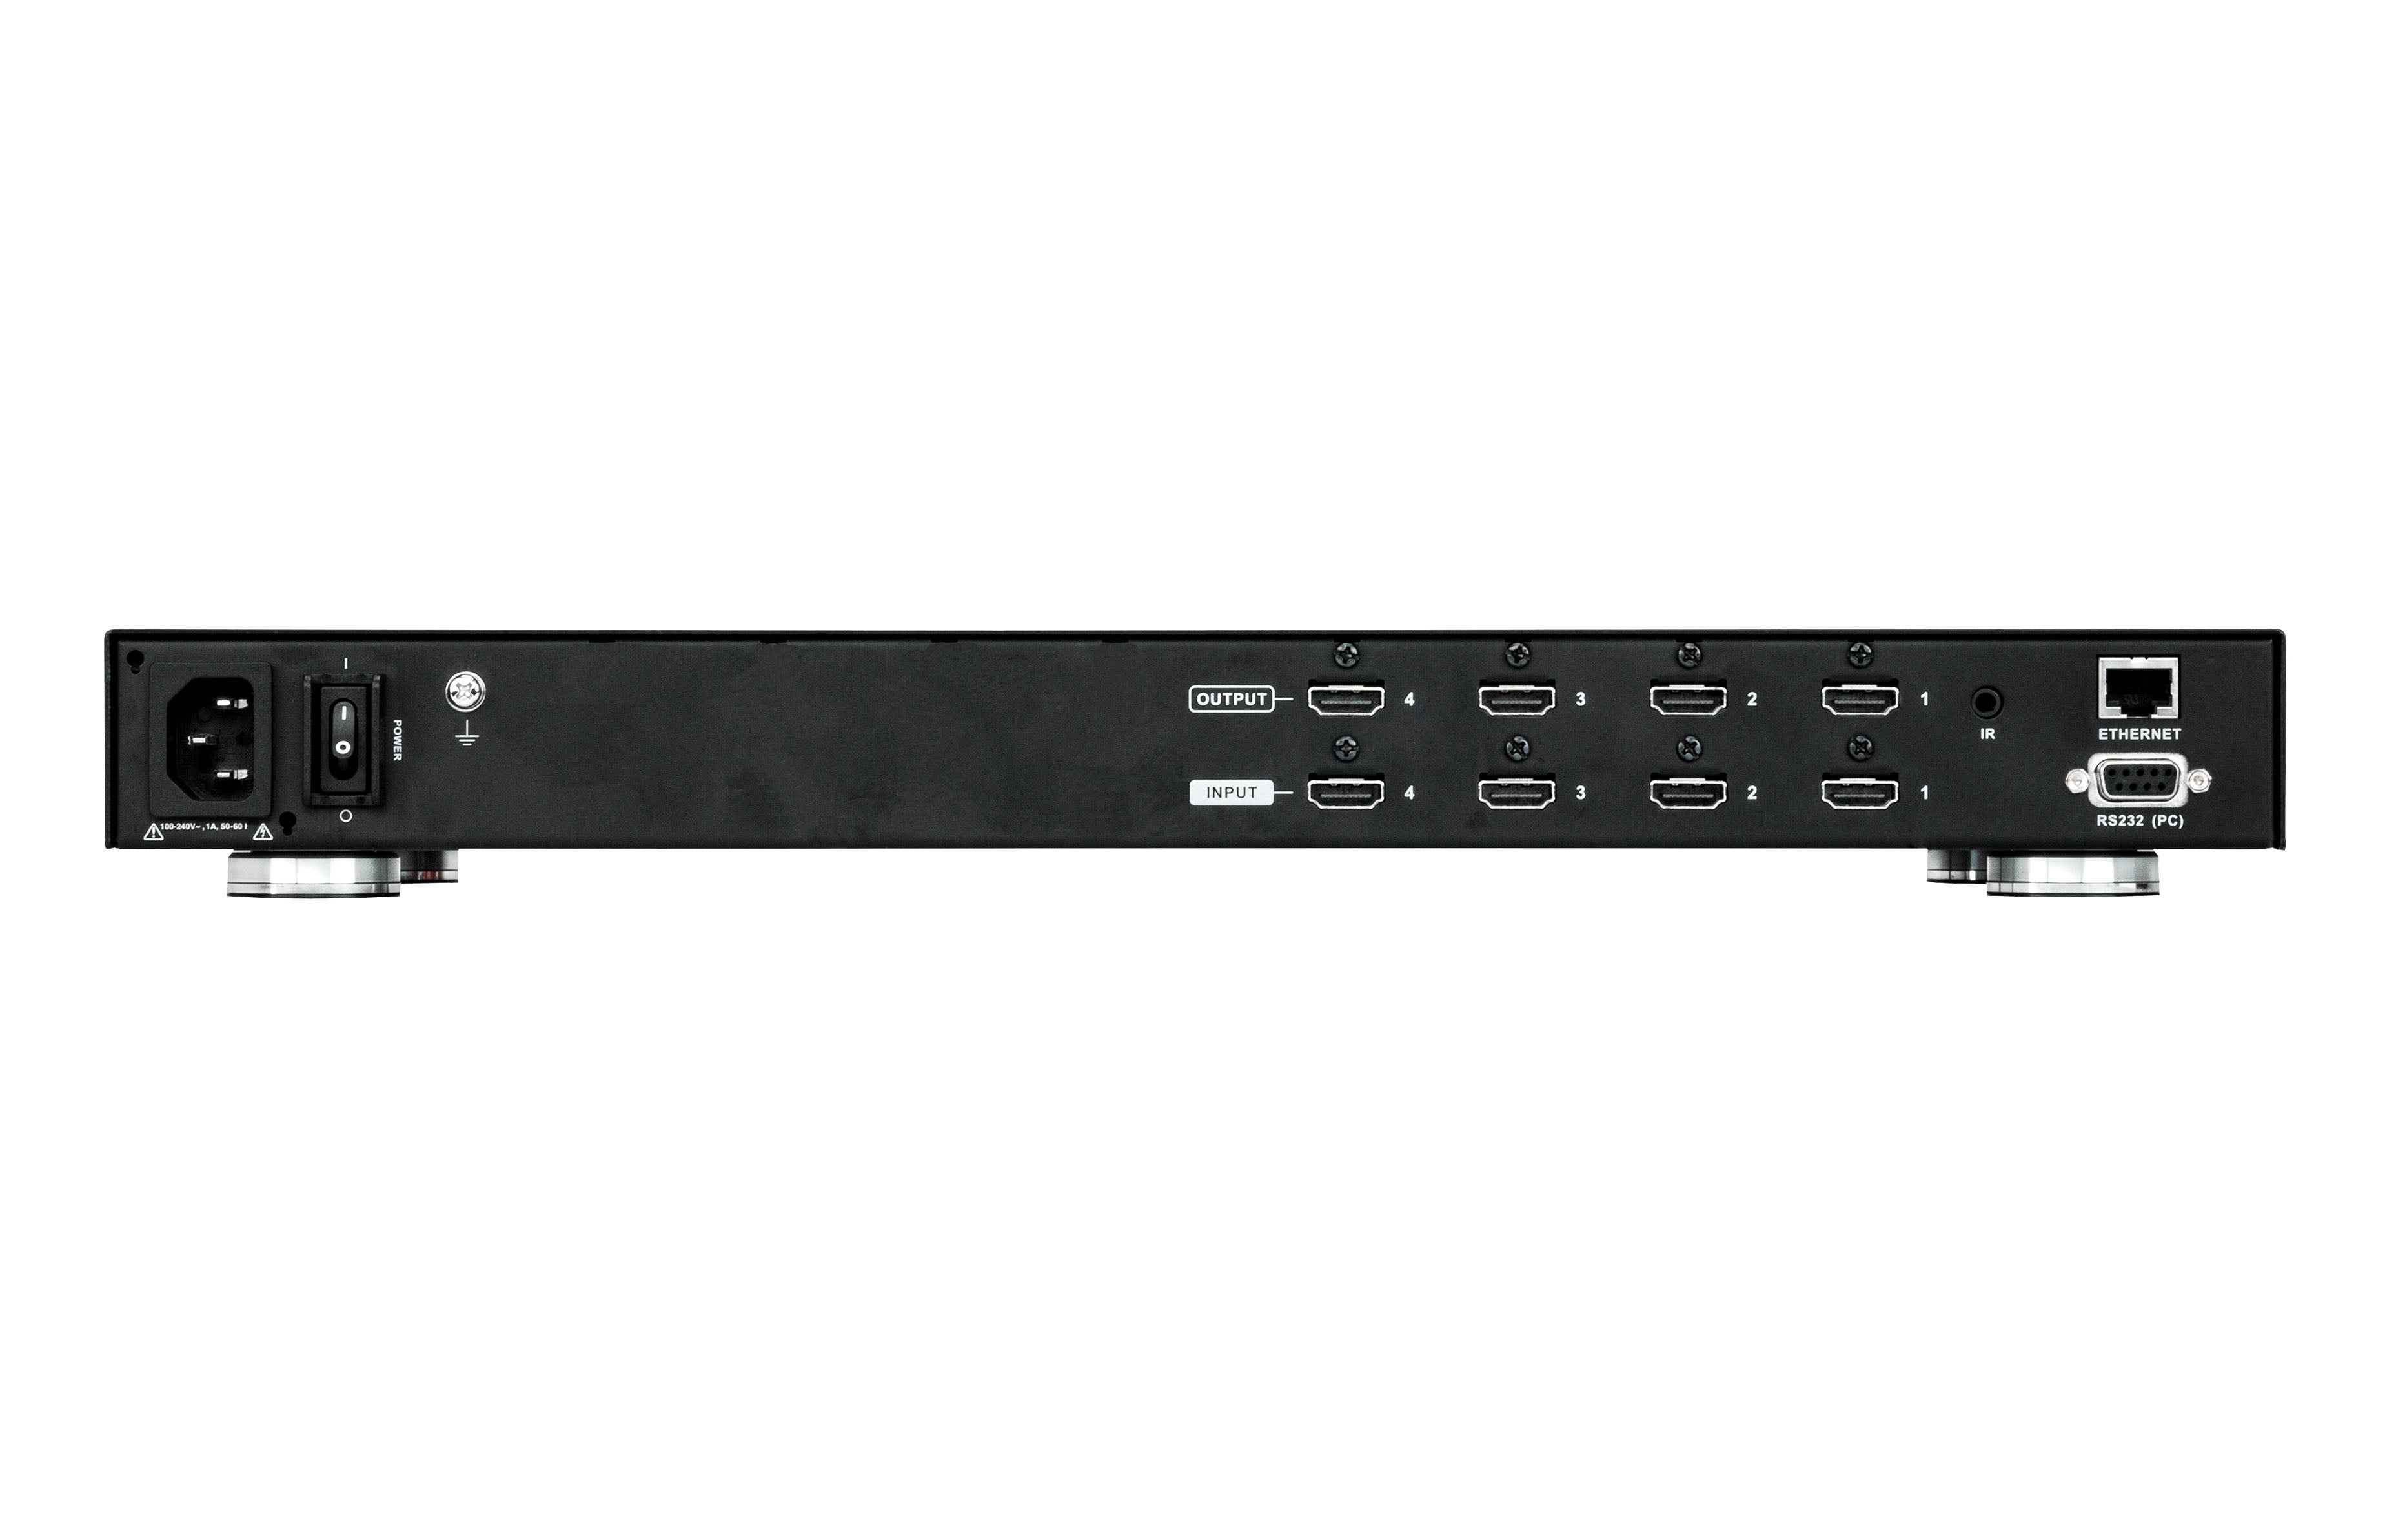 Aten 4 x 4 HDMI Matrix Switch with Scaler -VM5404H (3 Year Manufacture Local Warranty In Singapore)